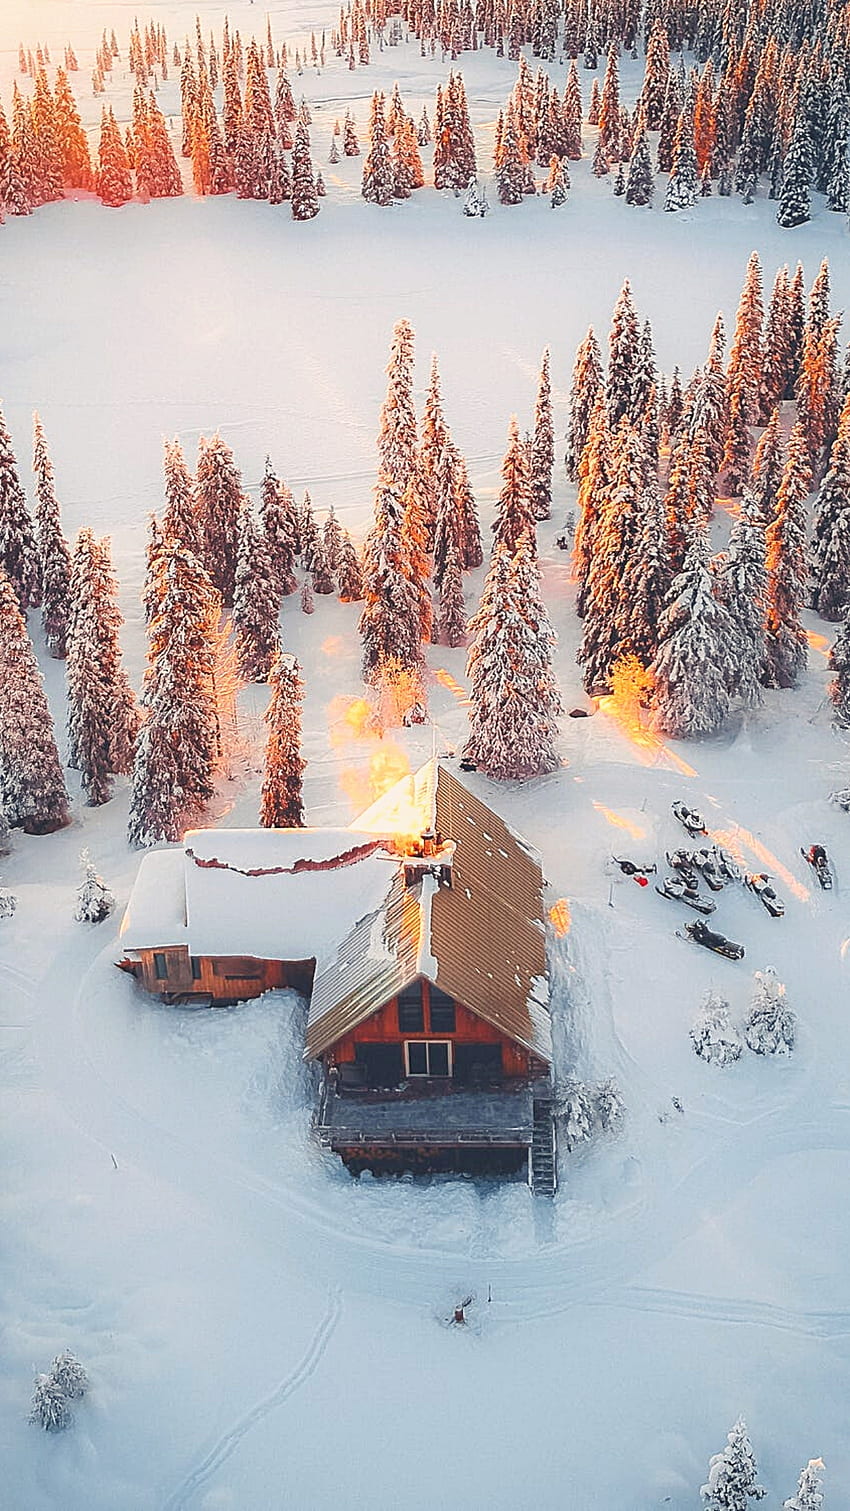 Download This Wallpaper  Cozy Cabin Winter is hd wallpapers  backgrounds  for desktop or mobile device To find more wallp  Winter wallpaper Cabin  Winter cabin